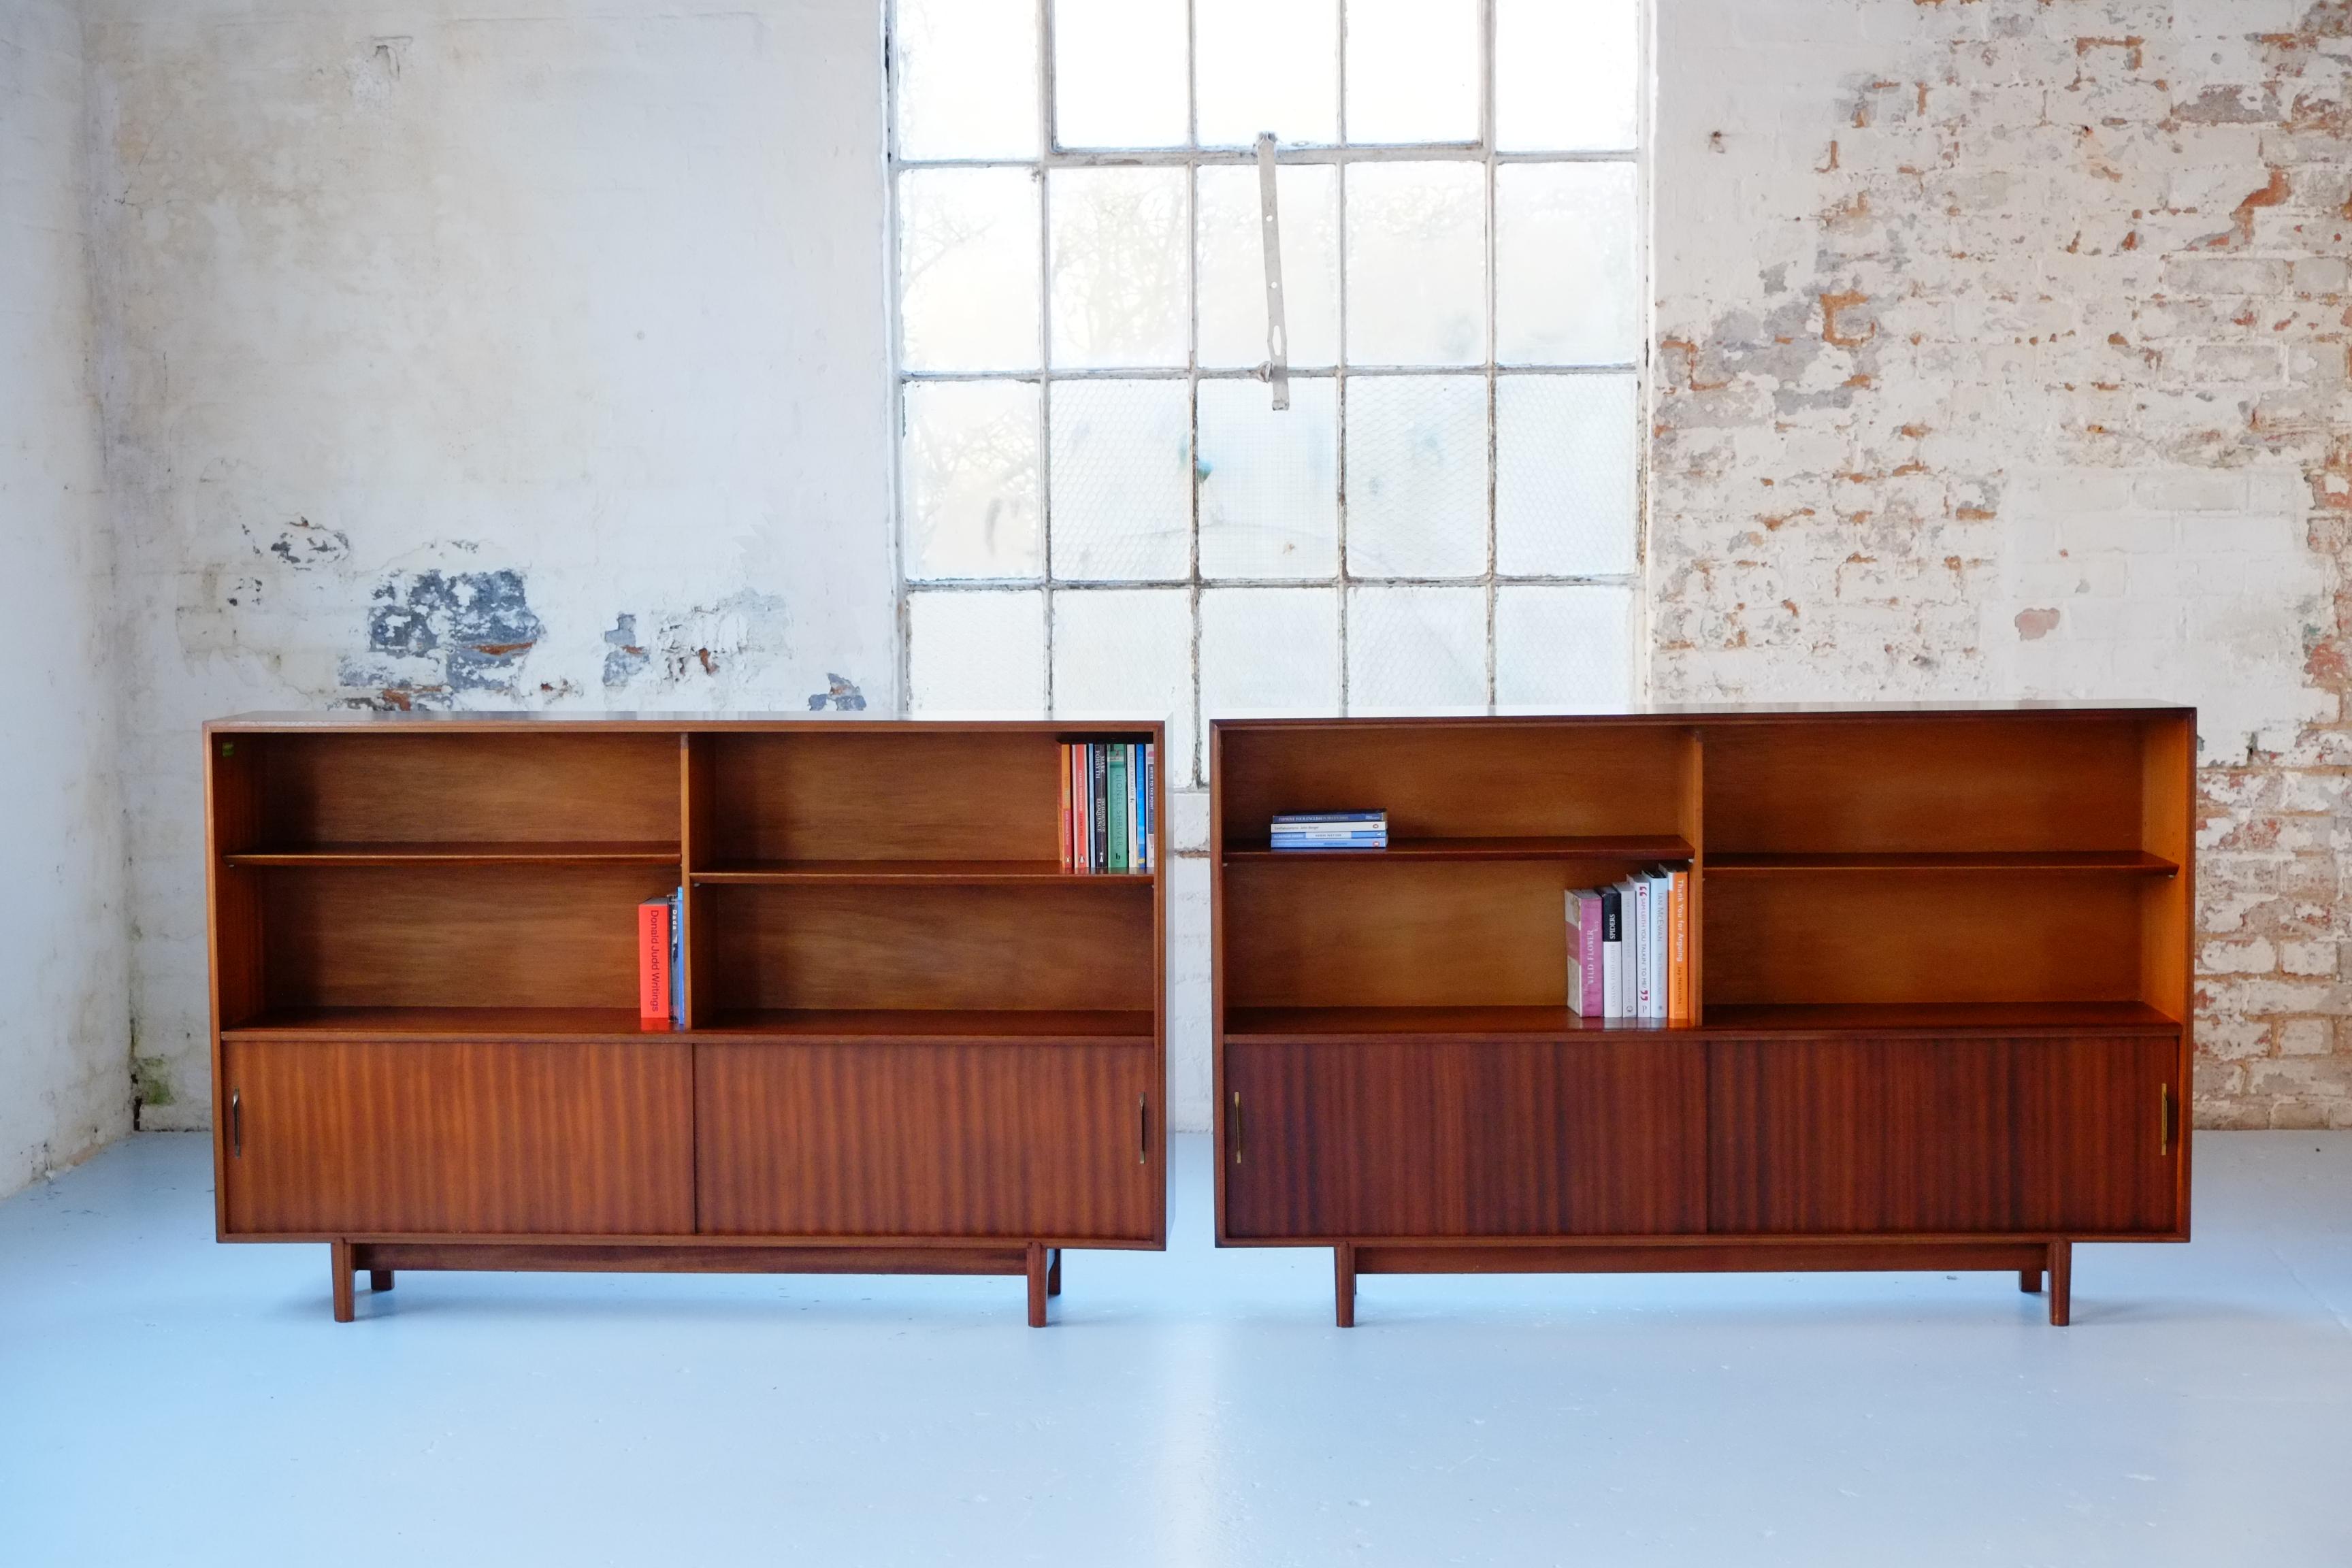 This is a pair of beautiful long slim glazed bookcases from the 1960s. These Mid-century modern cabinets were designed by Robert Heritage as part of the Multi-Width series for Beaver and Tapley. Beaver and Tapley was a mid-century British furniture